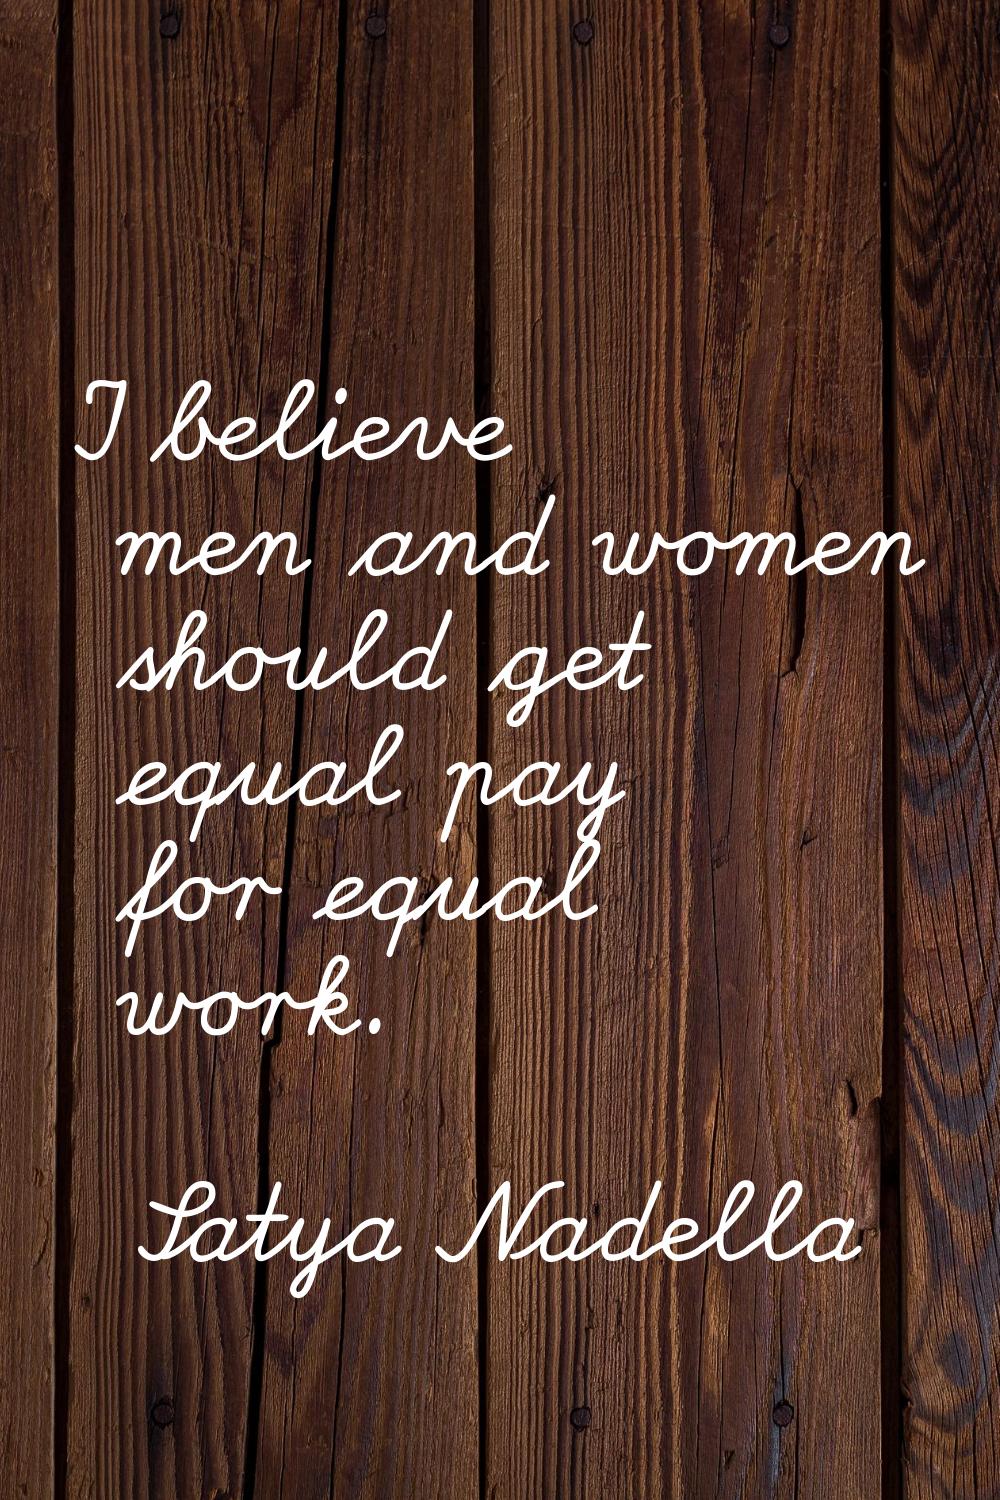 I believe men and women should get equal pay for equal work.